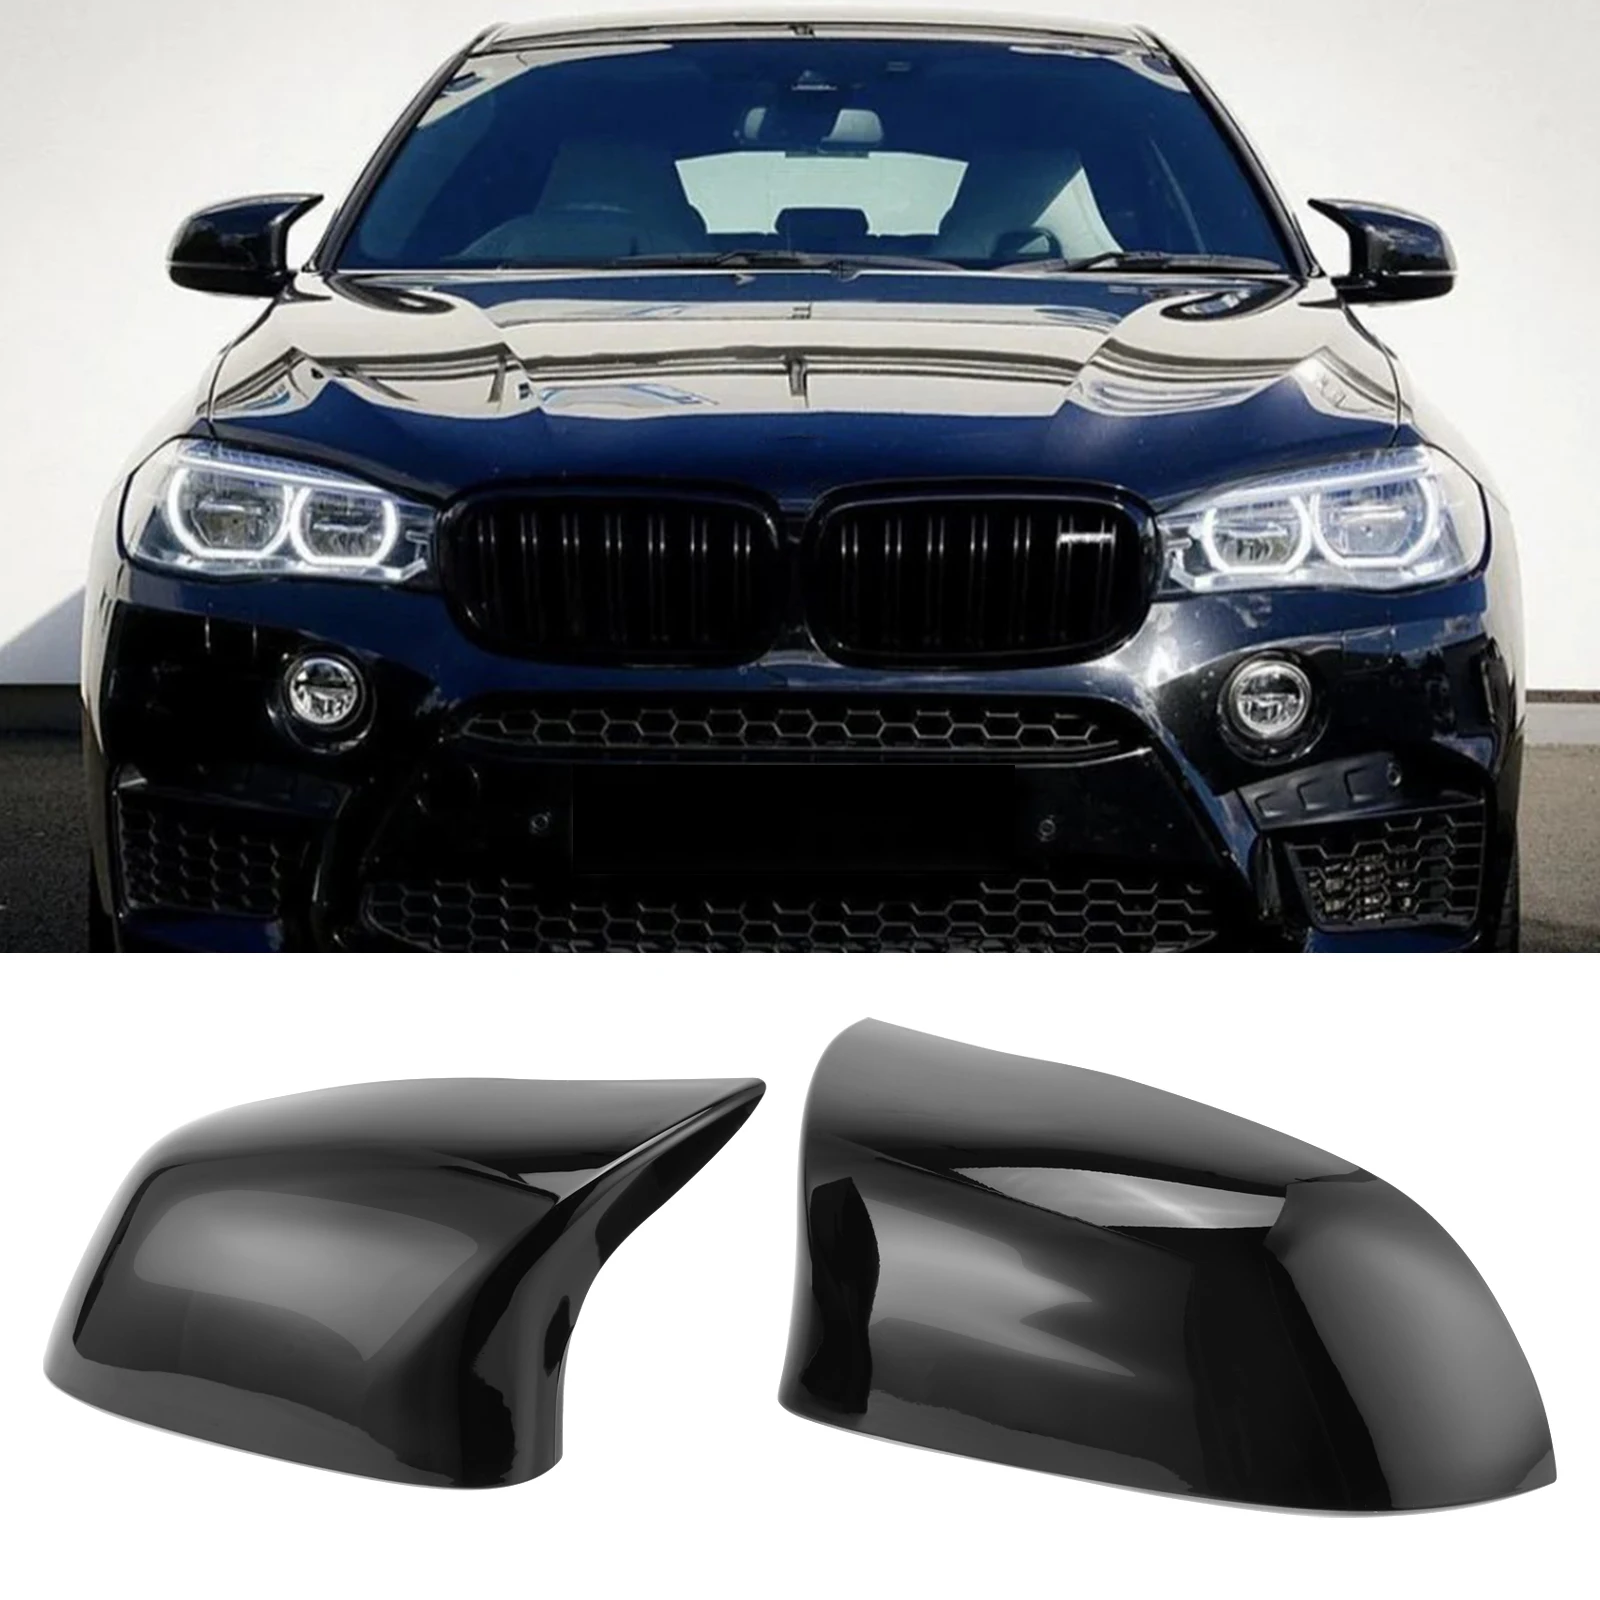 

Car Rearview Mirror Cover Caps M Performance Style Side Mirror Housing For BMW F15 X5 F25 X3 F16 X6 F26 X4 2014-2018 51167365114